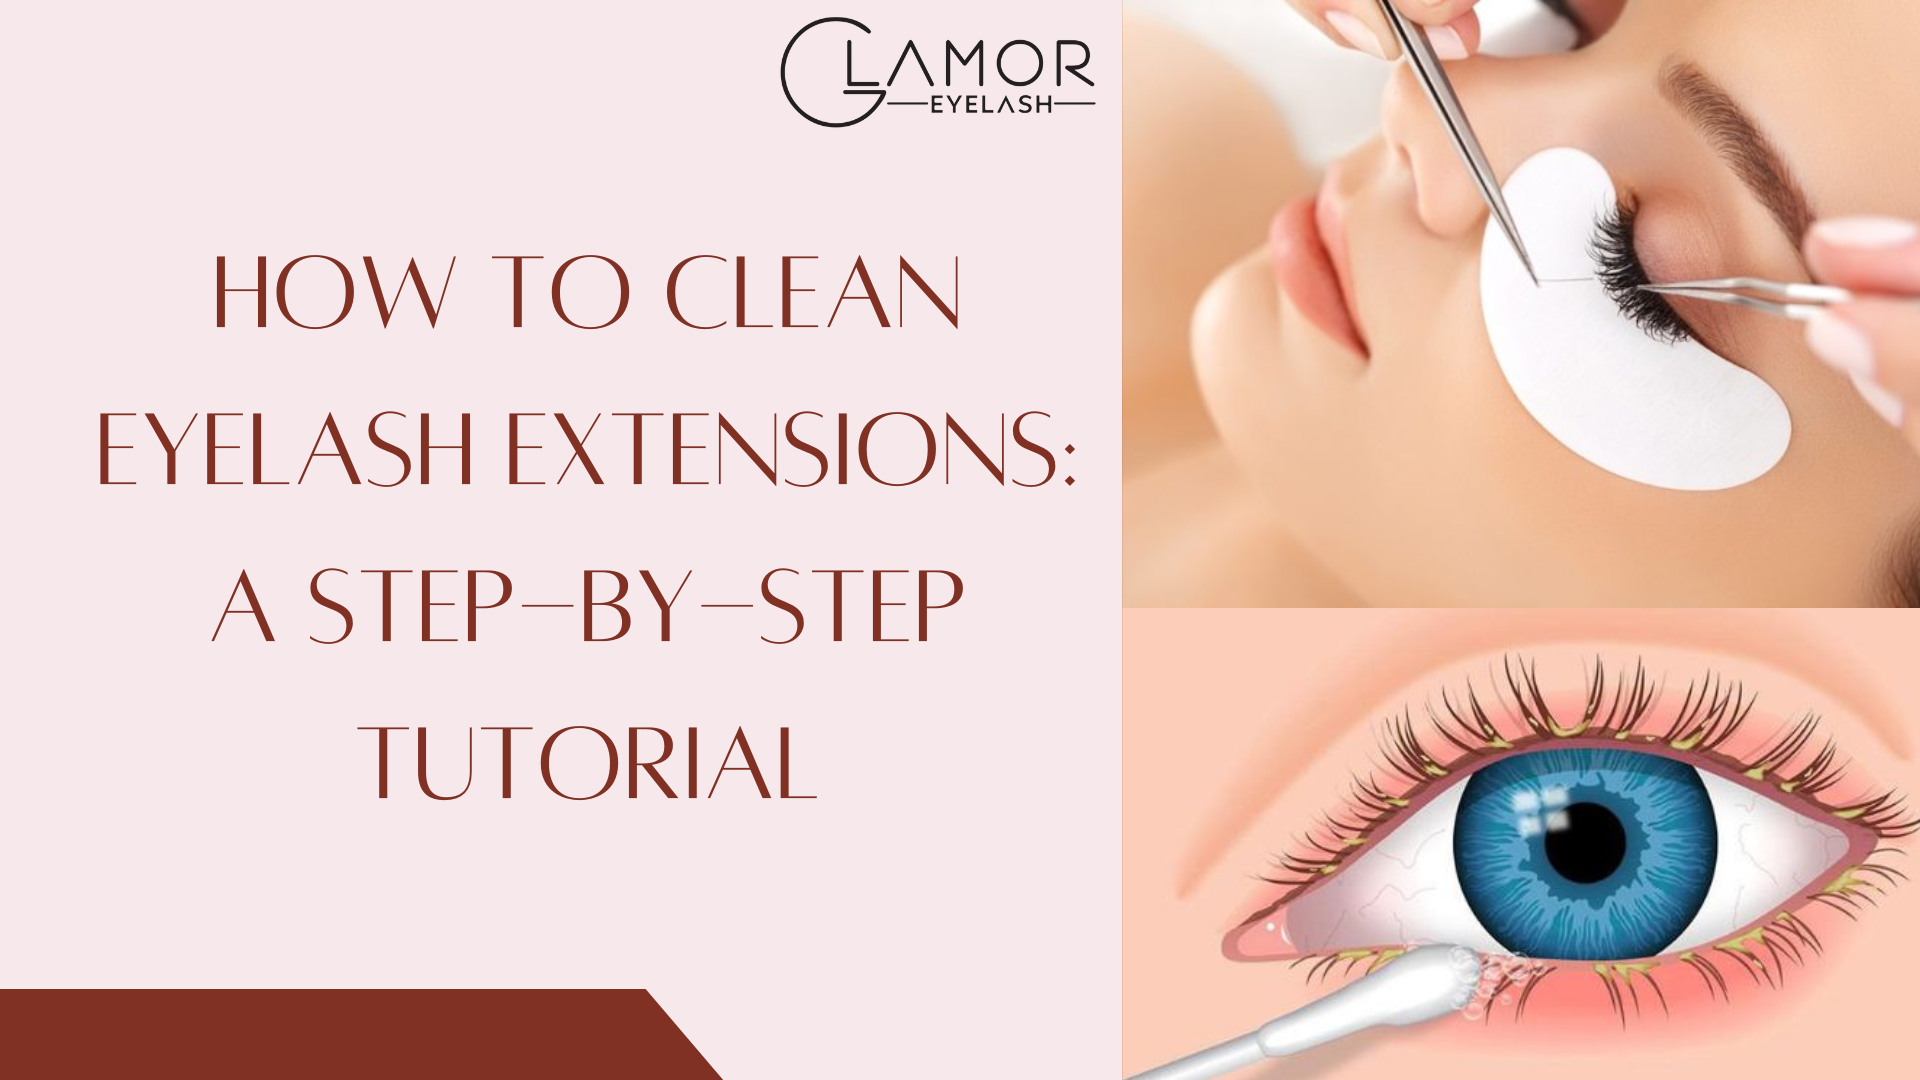 HOW TO CLEAN EYELASH EXTENSIONS: A STEP-BY-STEP TUTORIAL